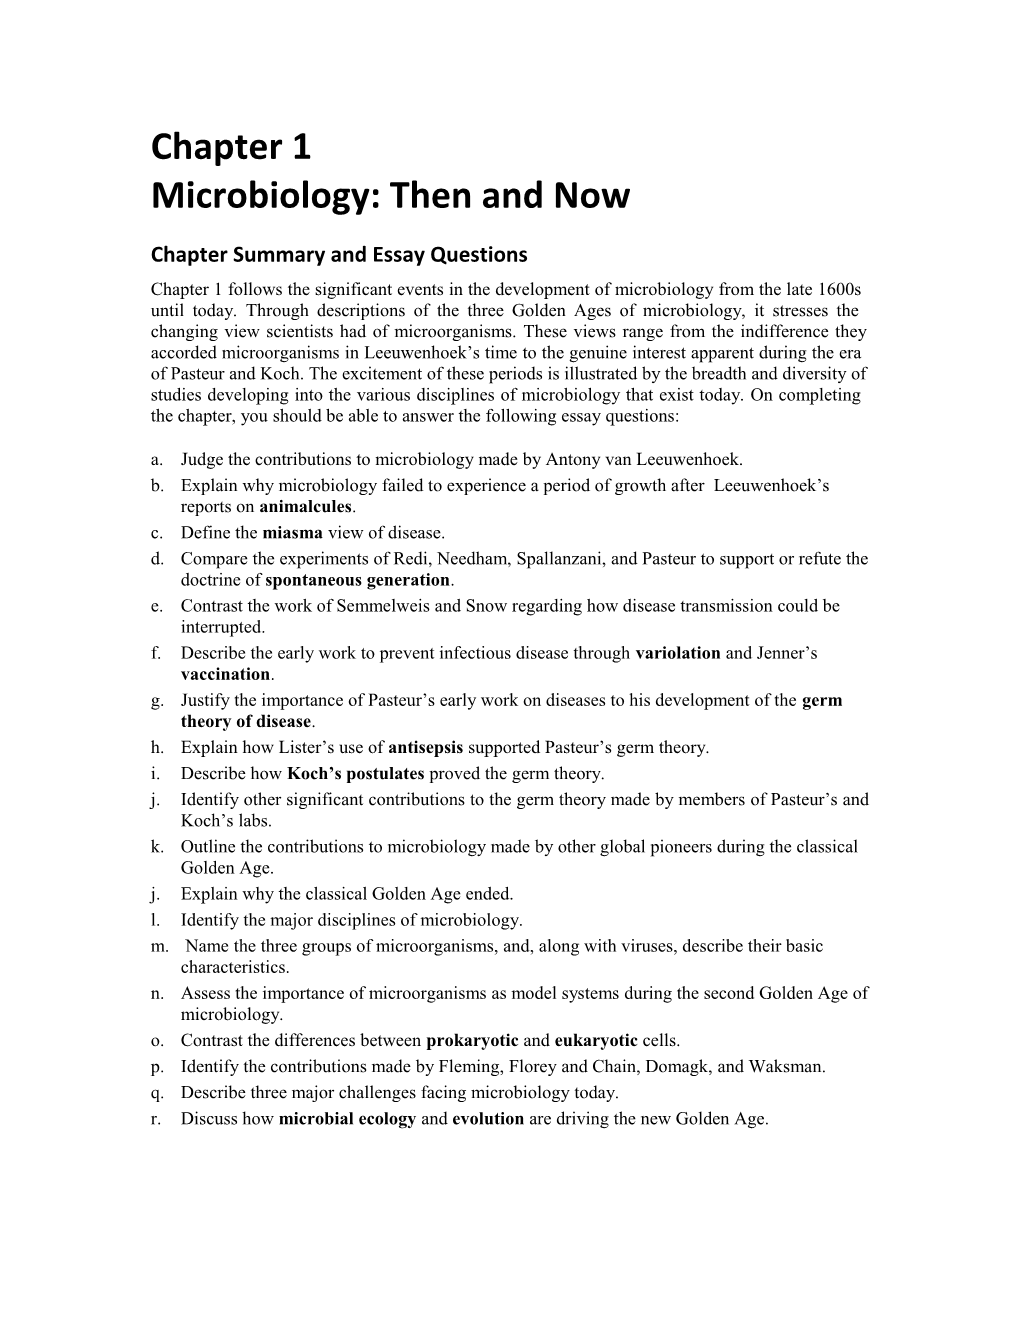 Microbiology: Then and Now